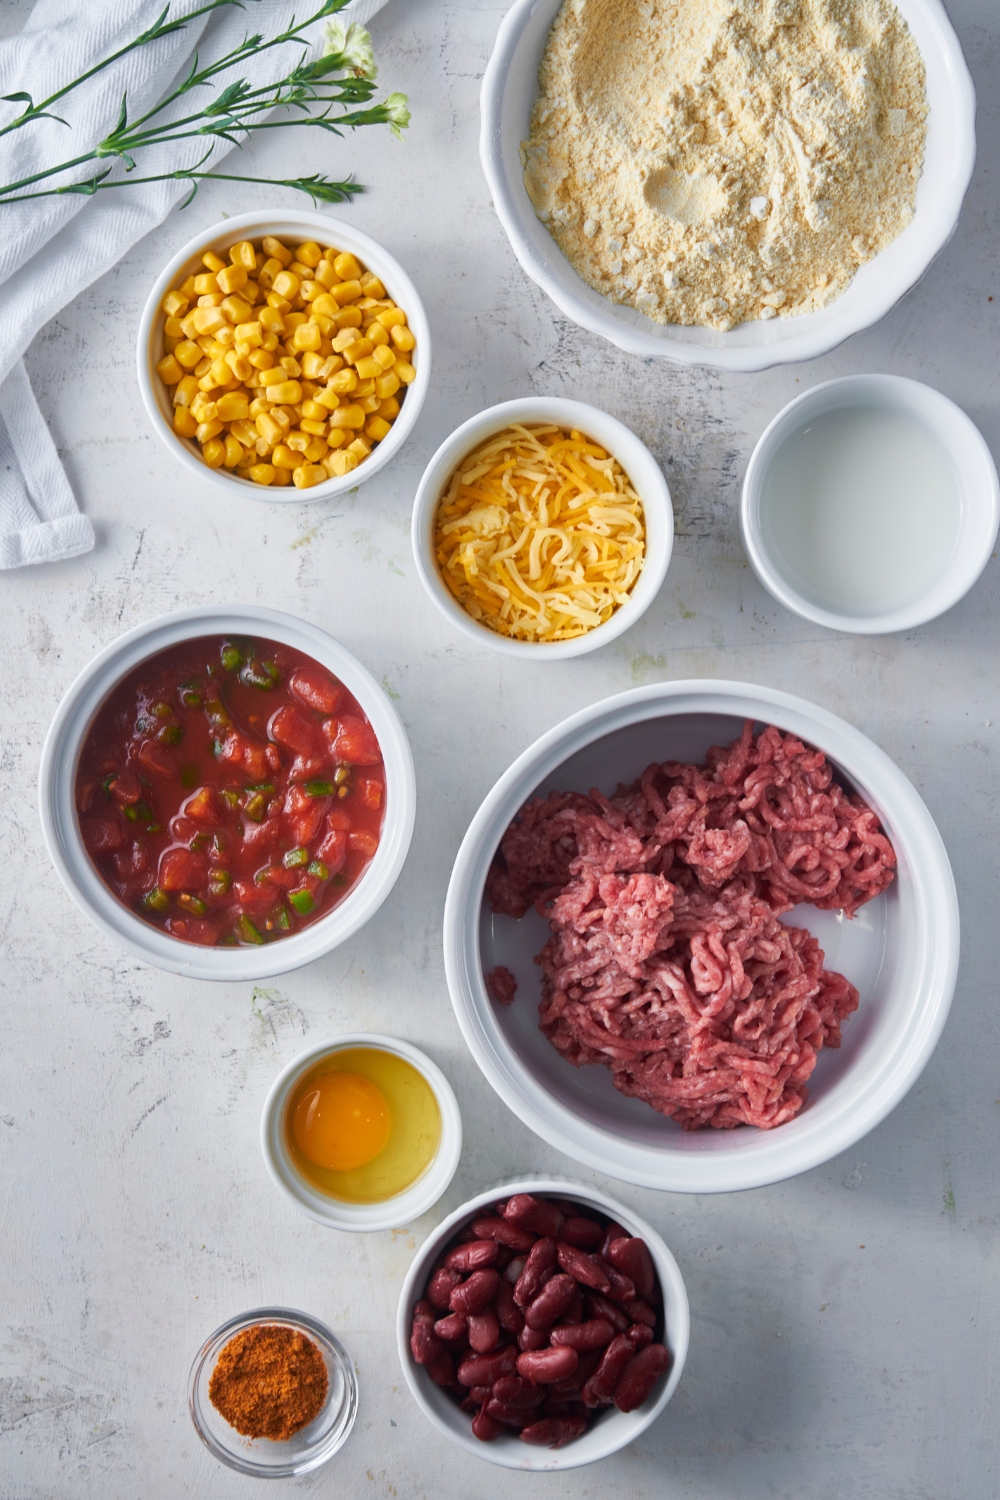 An assortment of ingredients including bowls of cornbread mix, raw ground beef, salsa, corn, shredded cheese, beans, an egg, and spices.